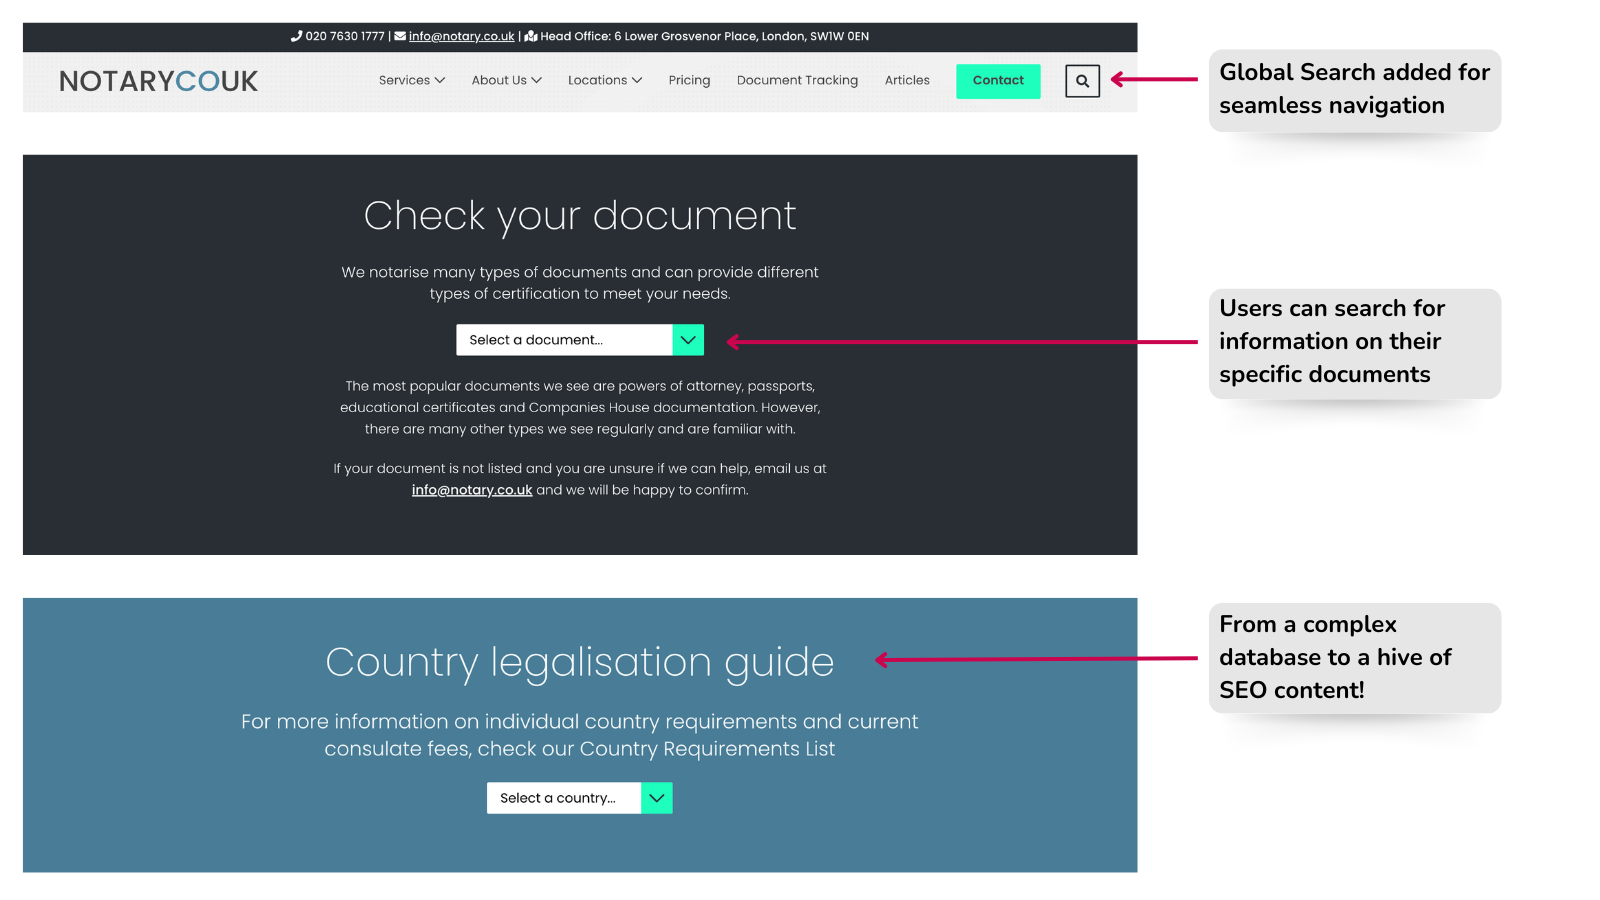 Screenshots from the Notary.co.uk website reveal the CRO updates.